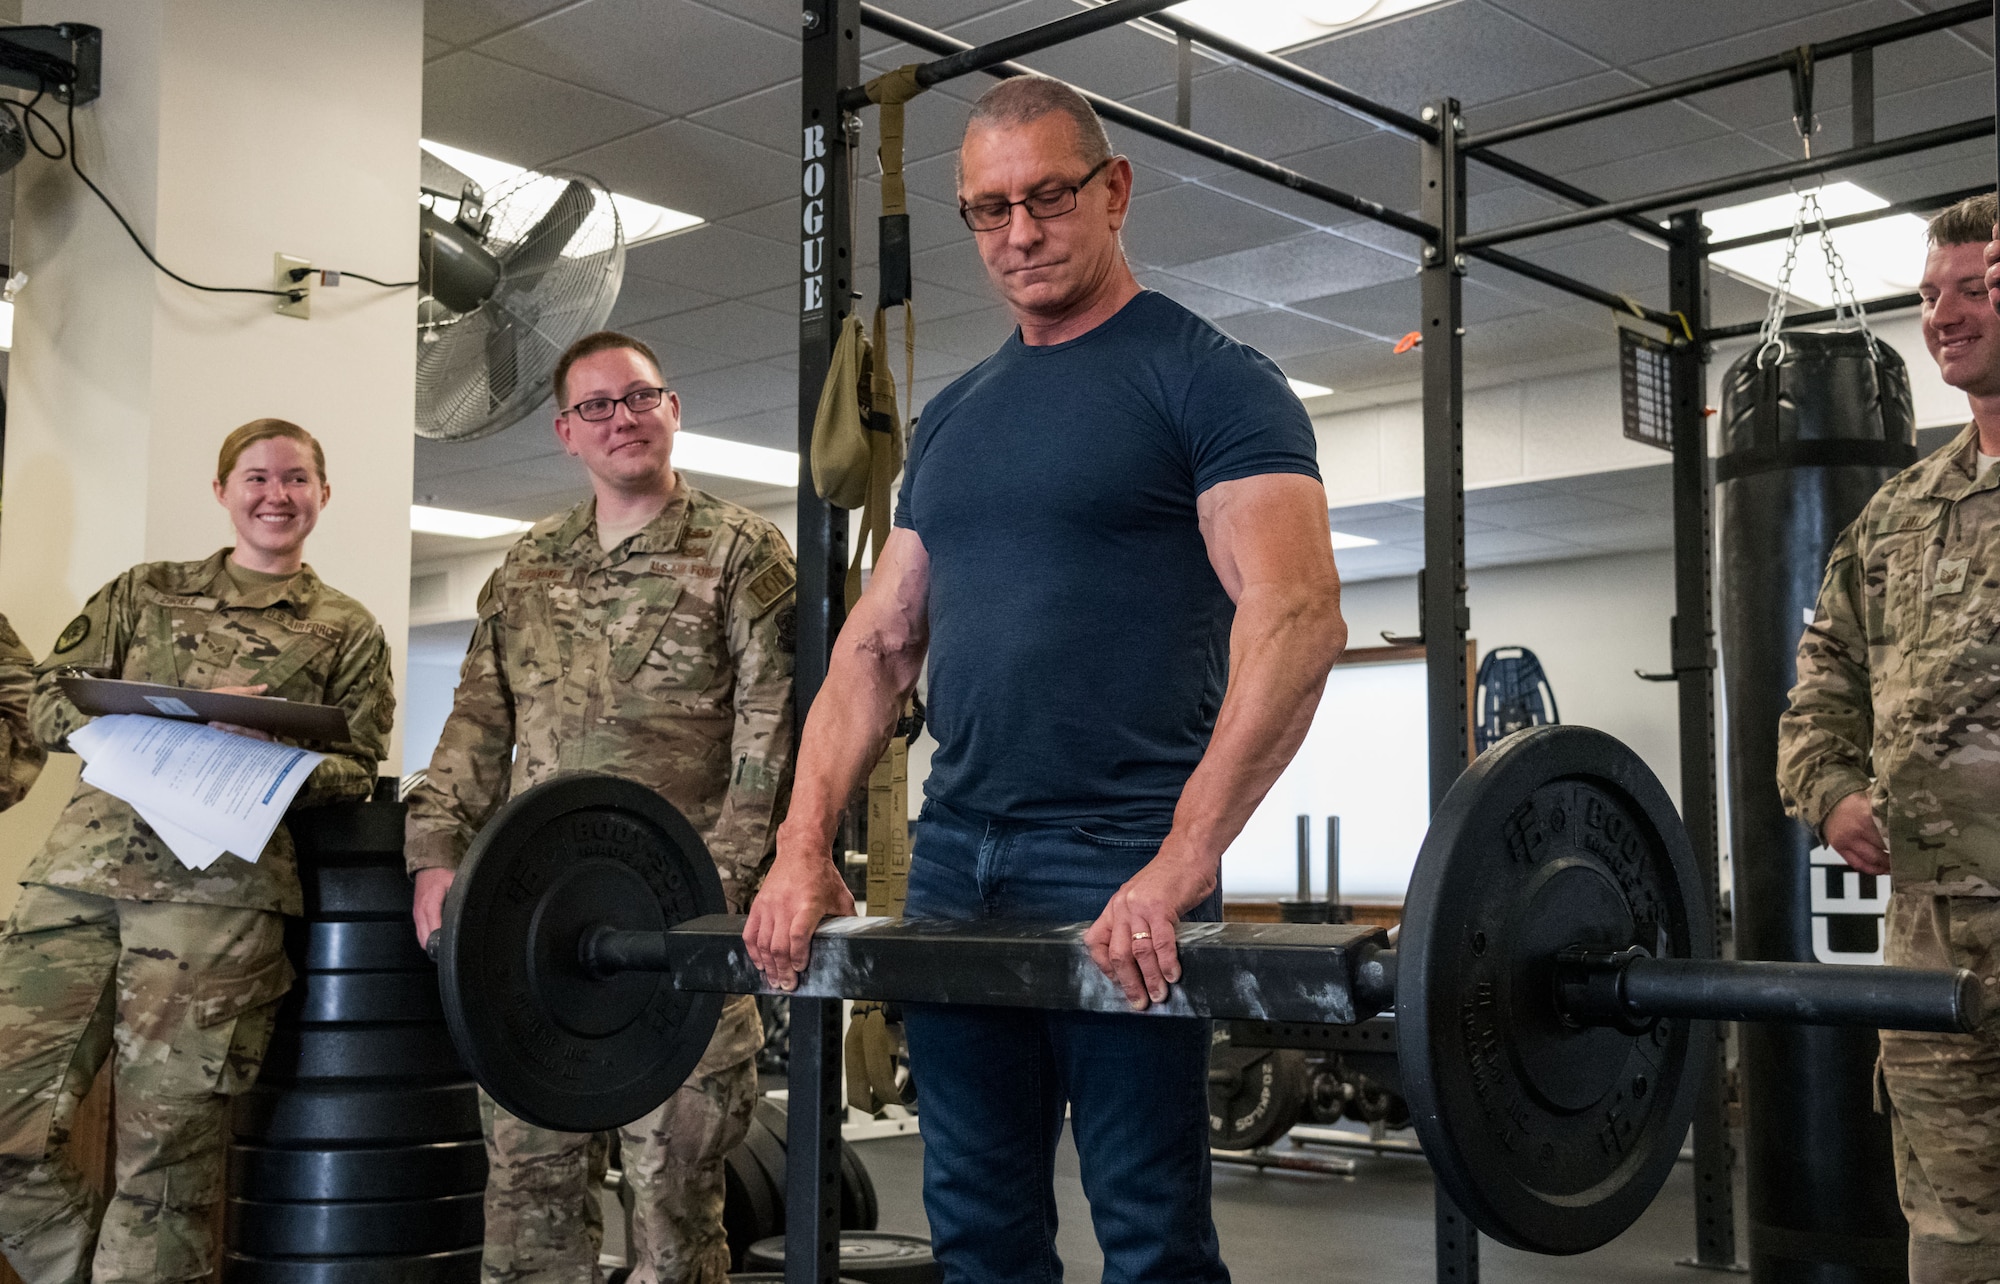 Chef Robert Irvine grasps a 65-pound bar to test his grip endurance during a tour of the 436th Civil Engineer Squadron explosive ordnance disposal flight, Aug. 27, 2019, on Dover Air Force Base, Del. Senior Airman Rachel Zirkle, EOD journeyman; Staff Sgt. Luke Herdade and Tech. Sgt. Carl Dill, both EOD craftsmen, watch Irvine perform the mandatory test for all EOD personnel. (U.S. Air Force photo by Roland Balik)